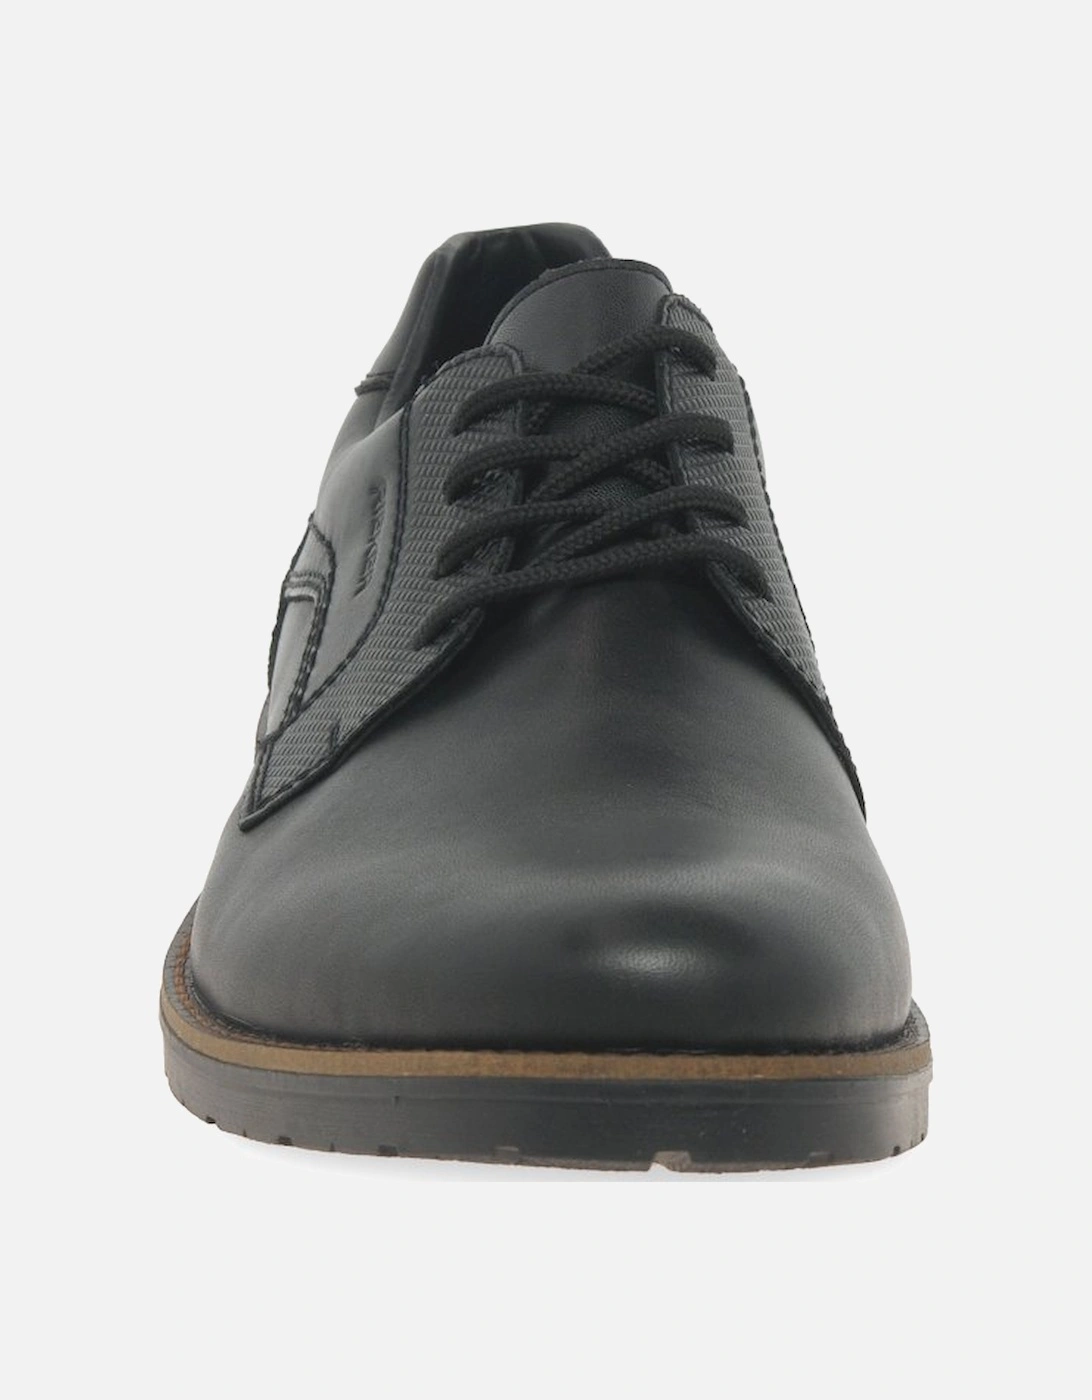 Riff Mens Formal Lace Up Shoes